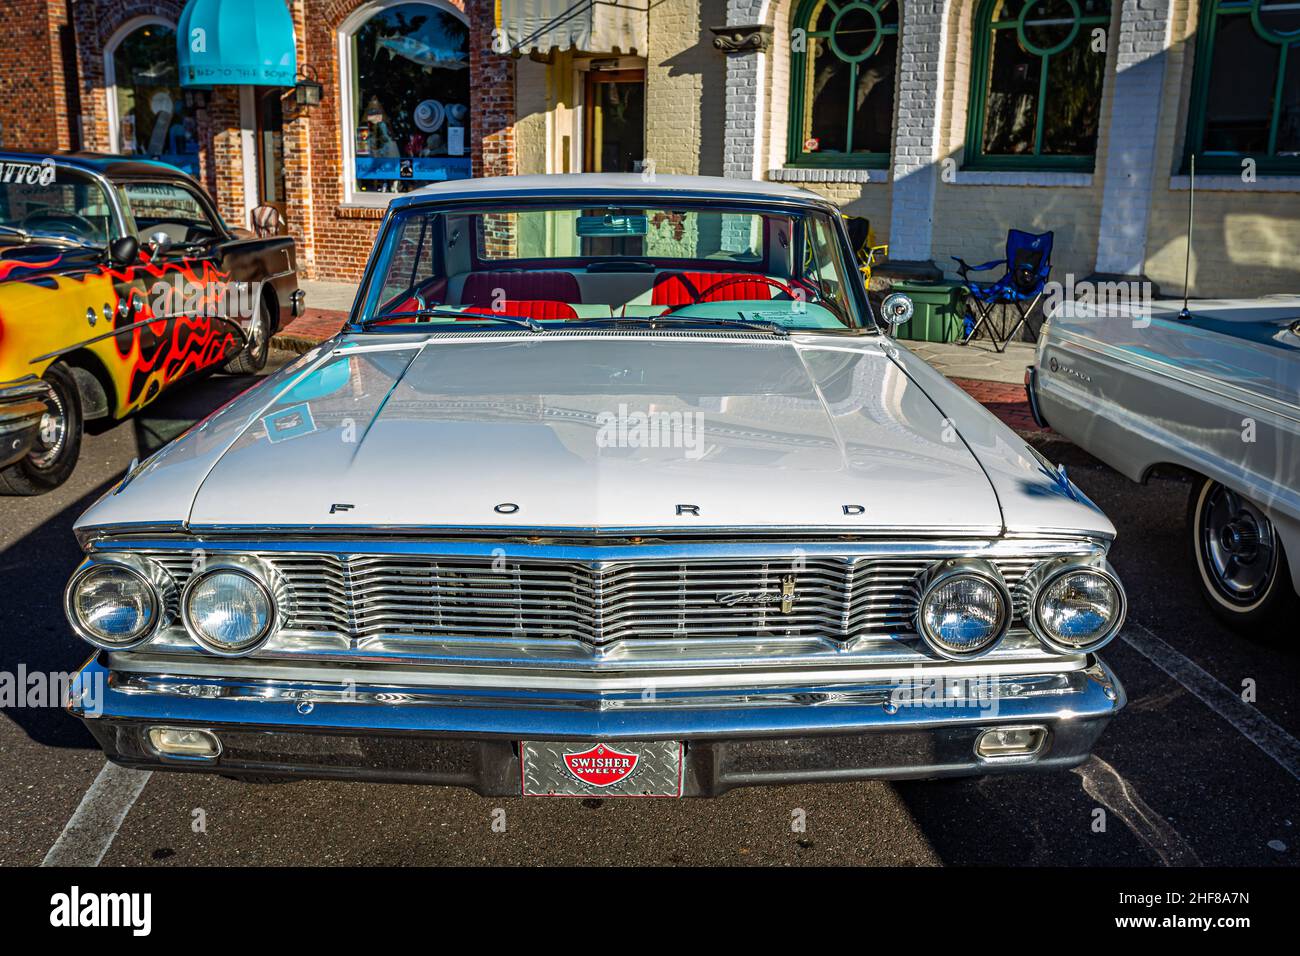 Fernandina Beach, FL - October 18, 2014: Wide angle front view of a 1964 Ford Galaxie 500 hardtop coupe at a classic car show in Fernandina Beach, Flo Stock Photo